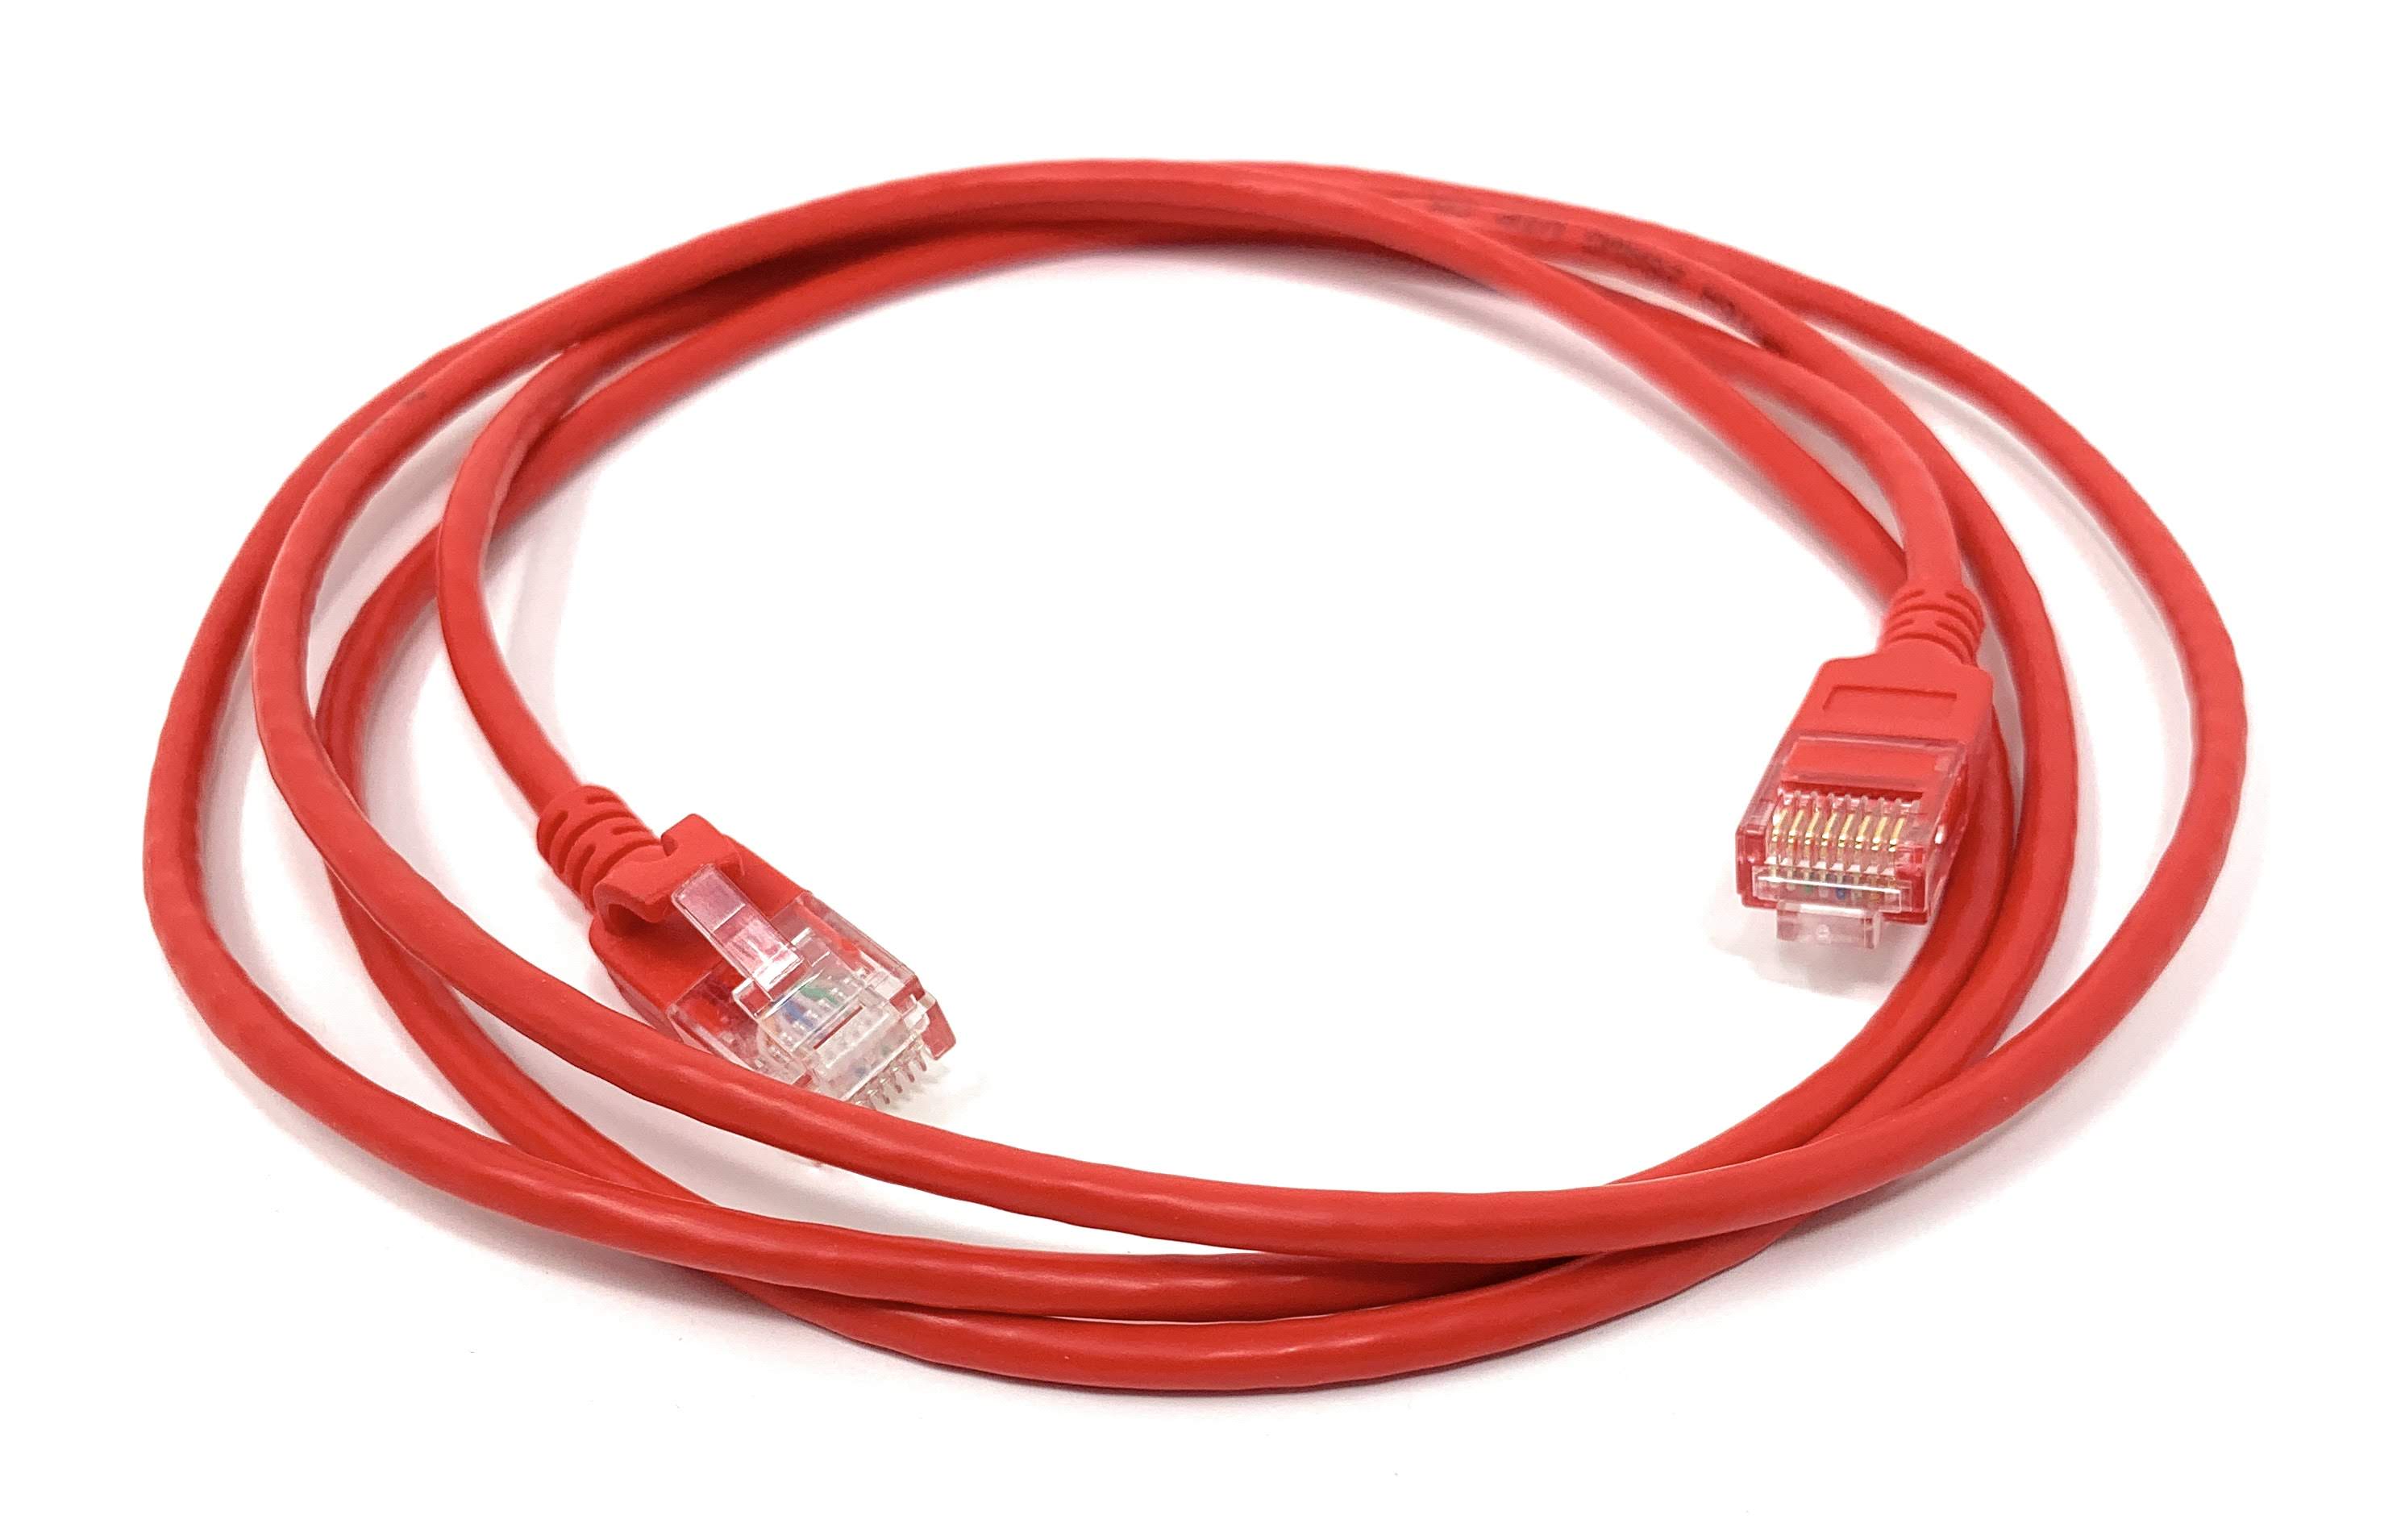 Category 6a 28awg Patch Cables with Slim Jacket- 7 Feet